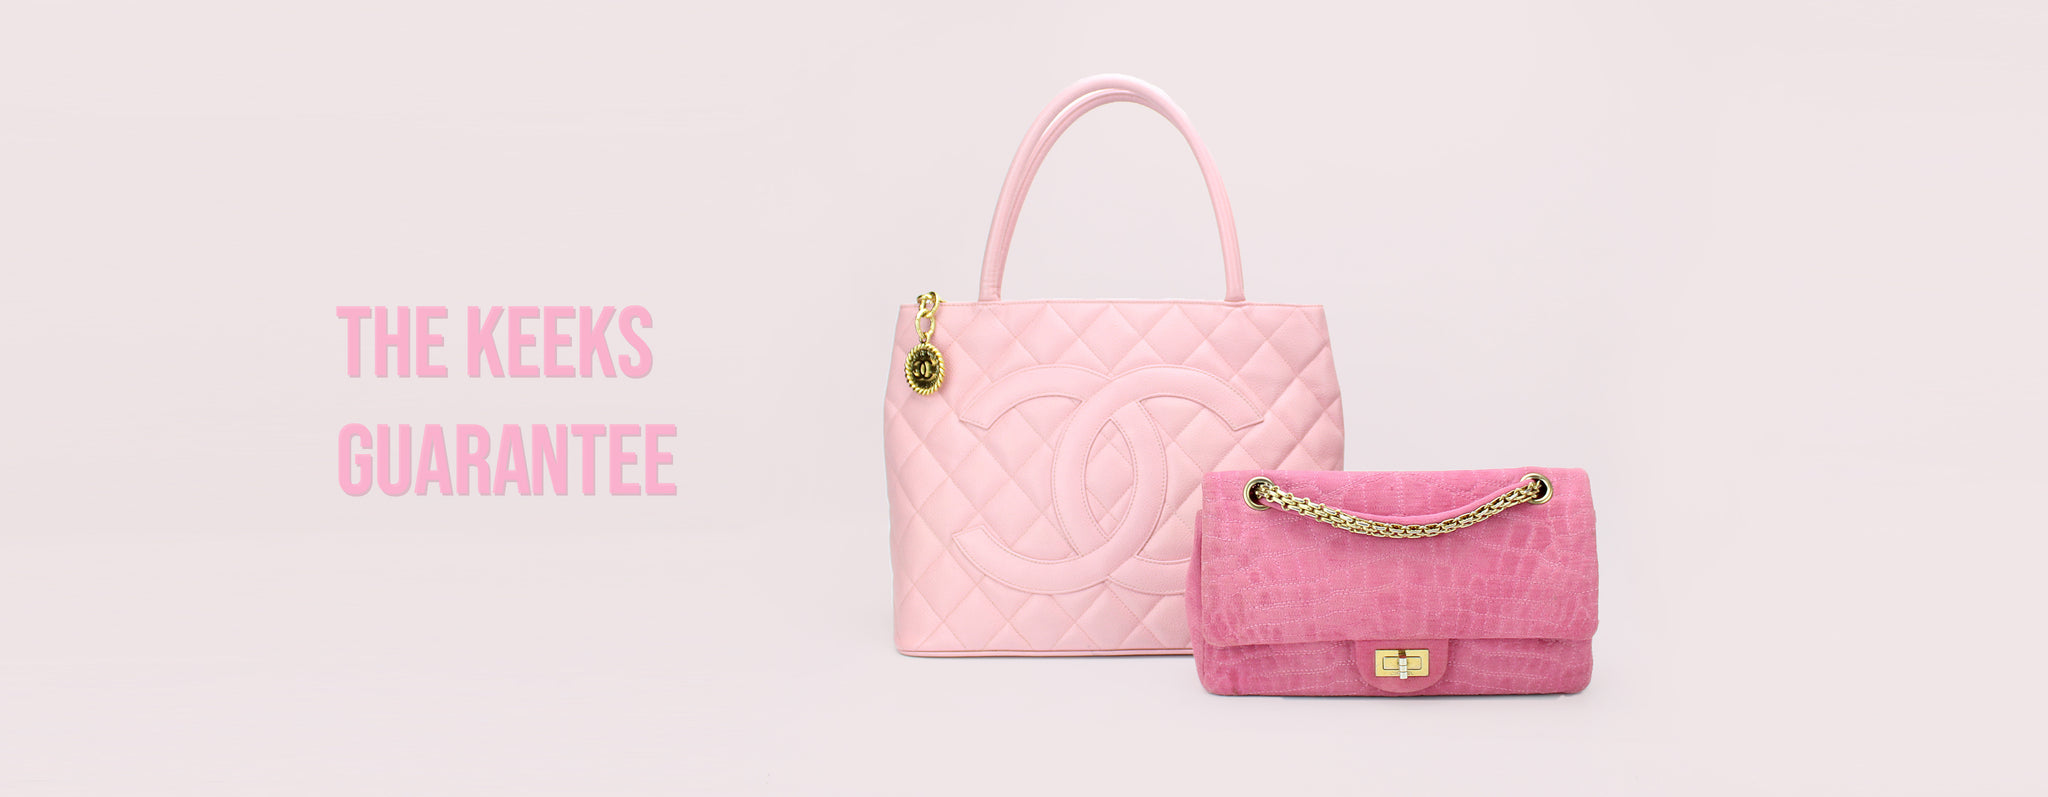 Keeks  Buy & Sell Authentic Luxury Handbags and Accessories